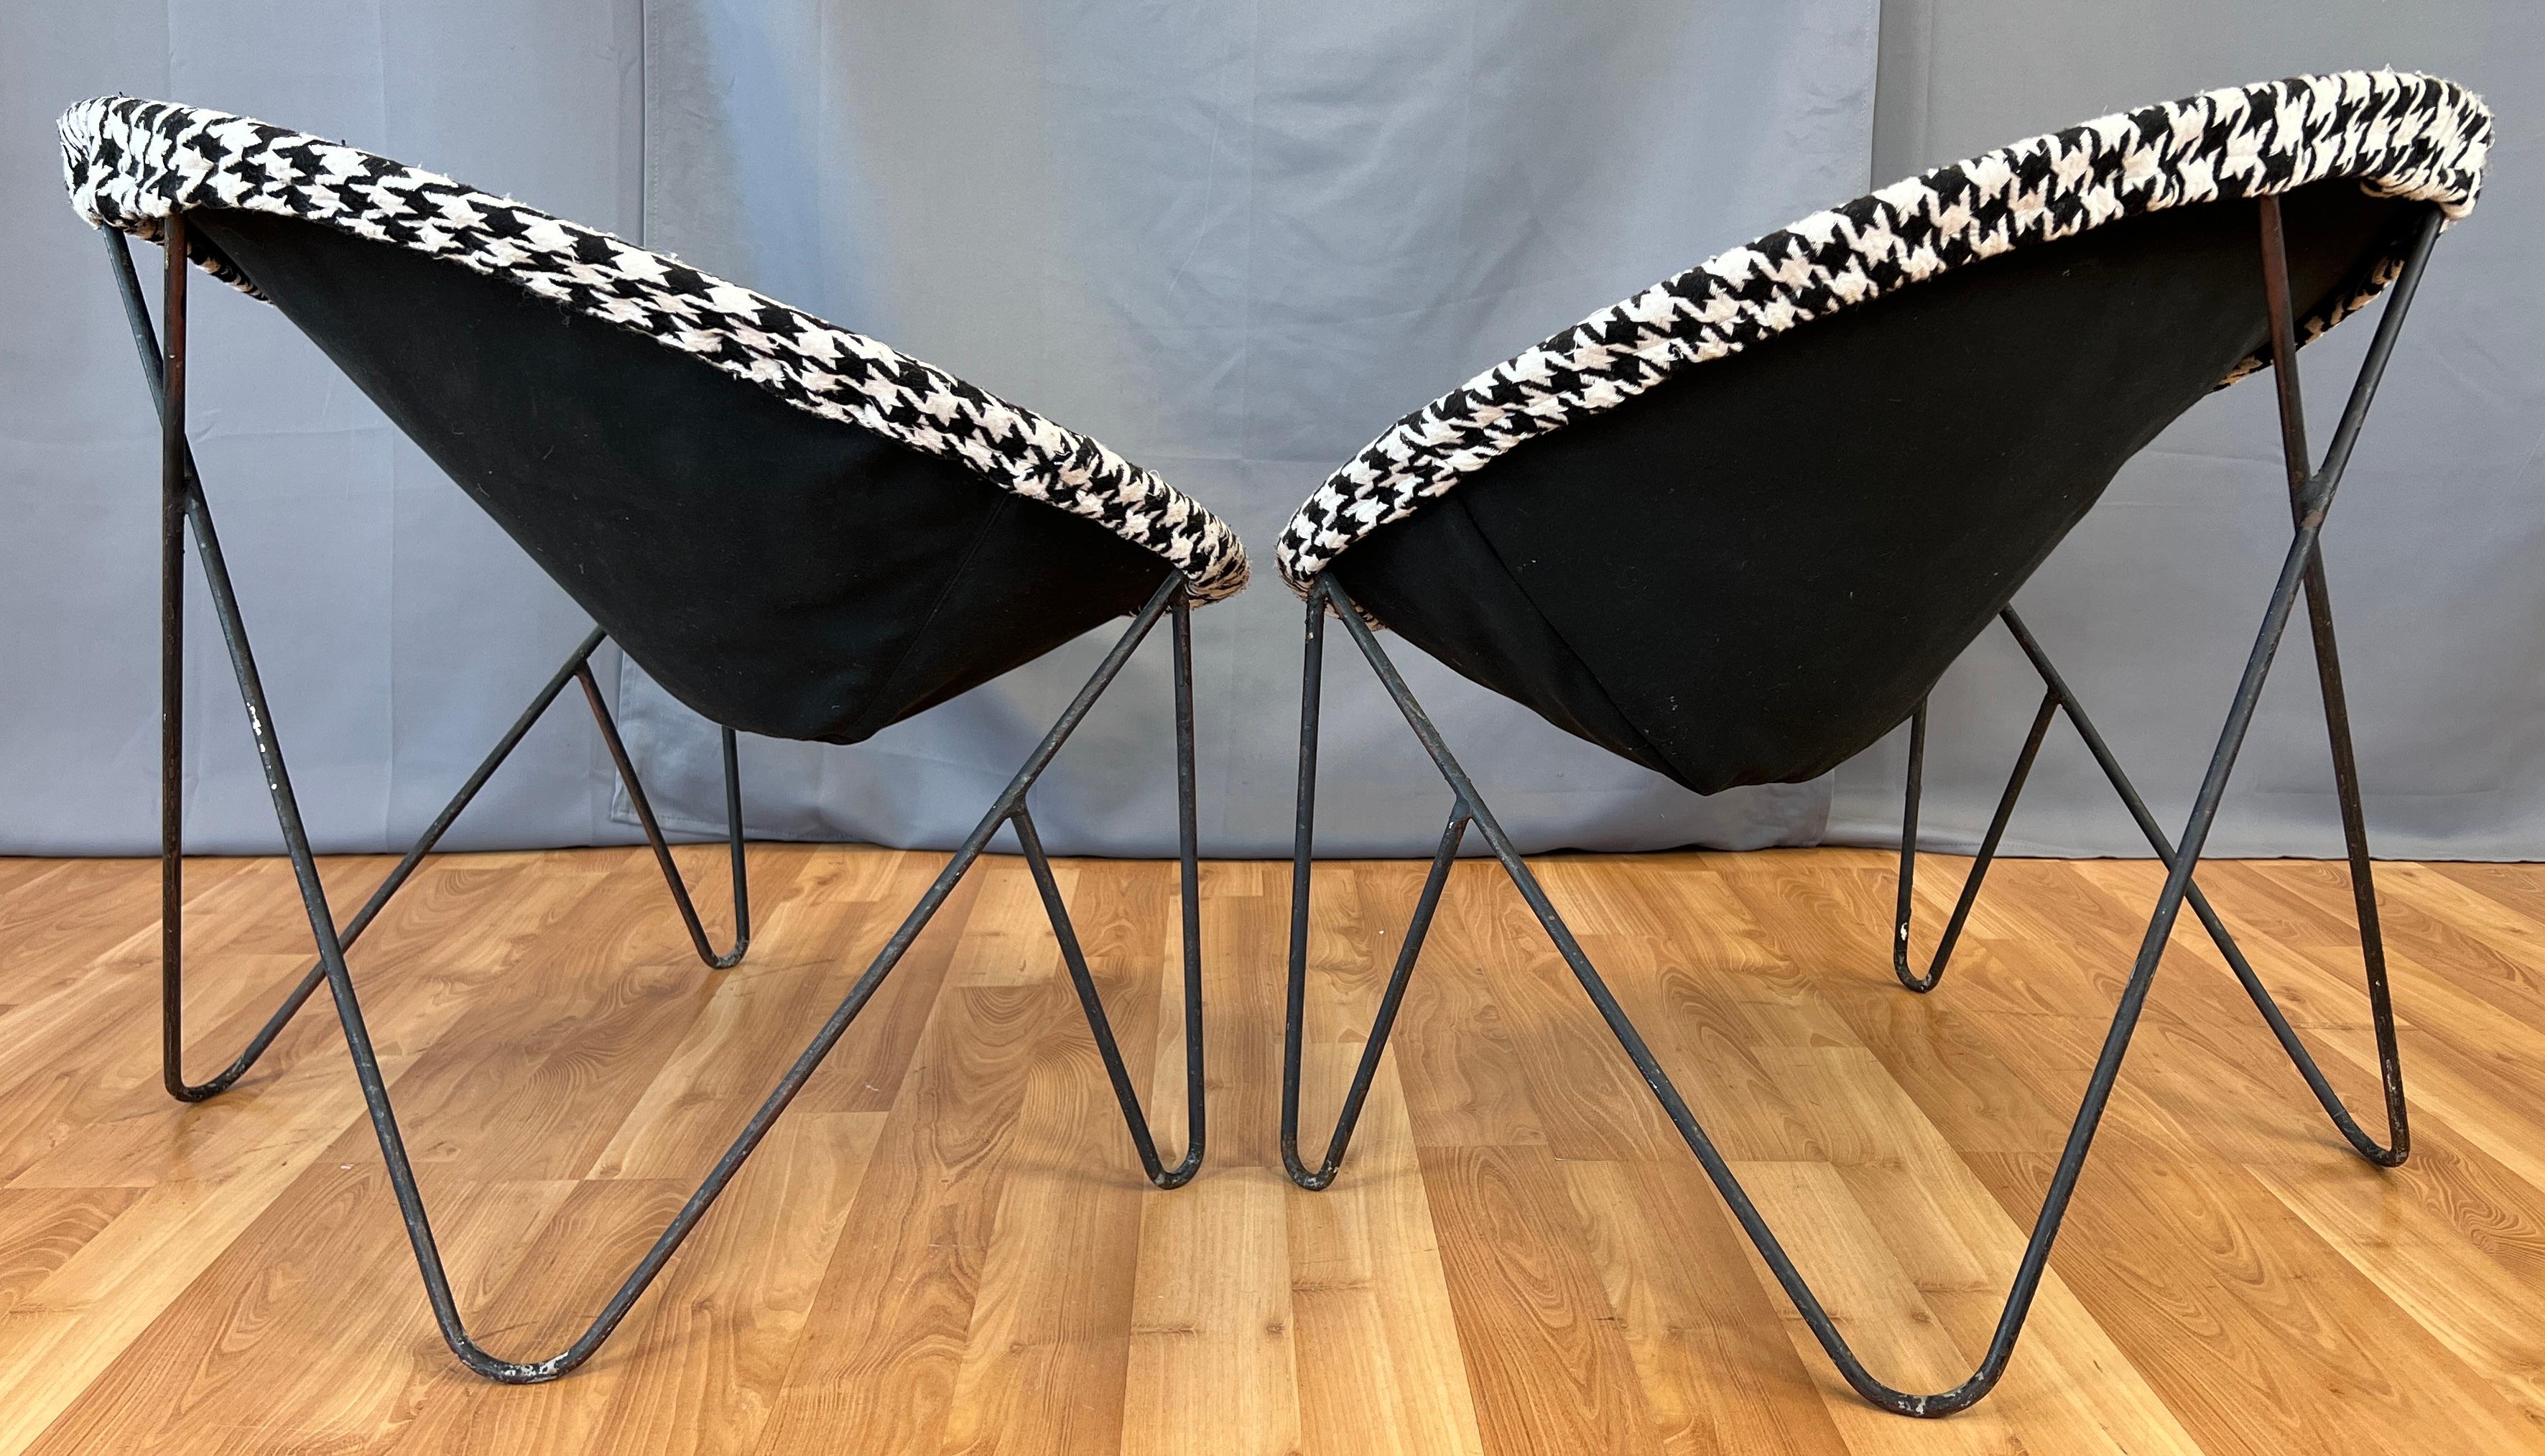 Fabric Pair of Mid-century 1950s Wrought Iron Hoop Chairs Black/White Upholstery  For Sale